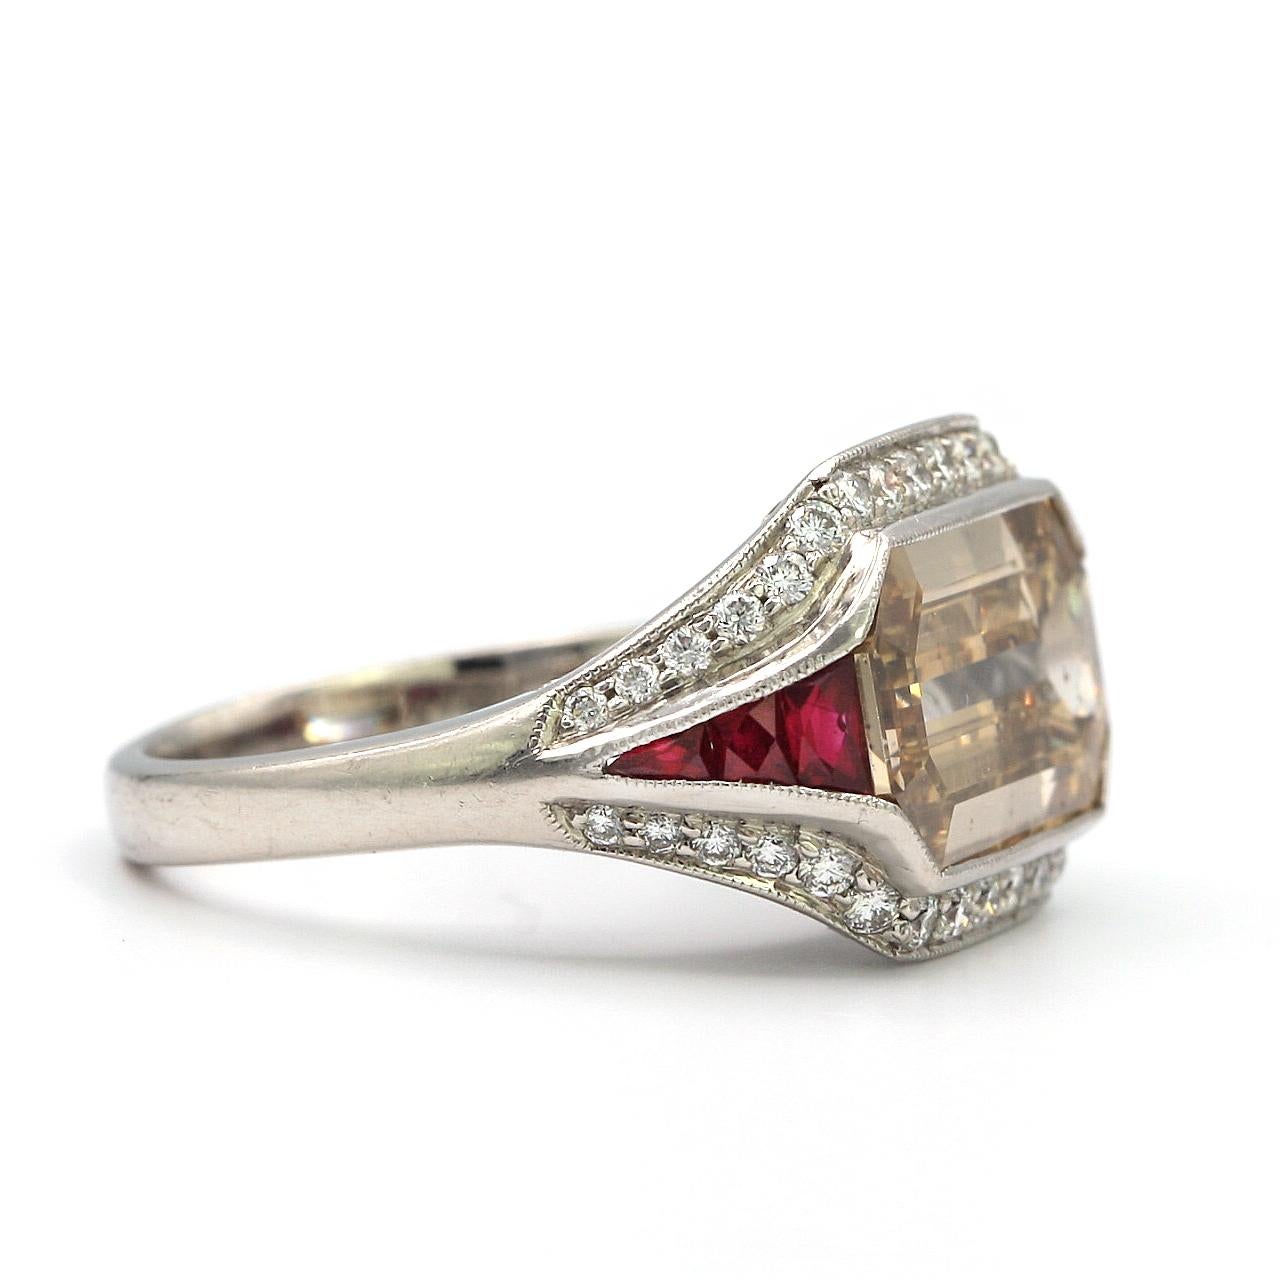 5.00 Carat Emerald Cut Diamond with Rubies in Platinum Ring In Good Condition For Sale In Los Angeles, CA